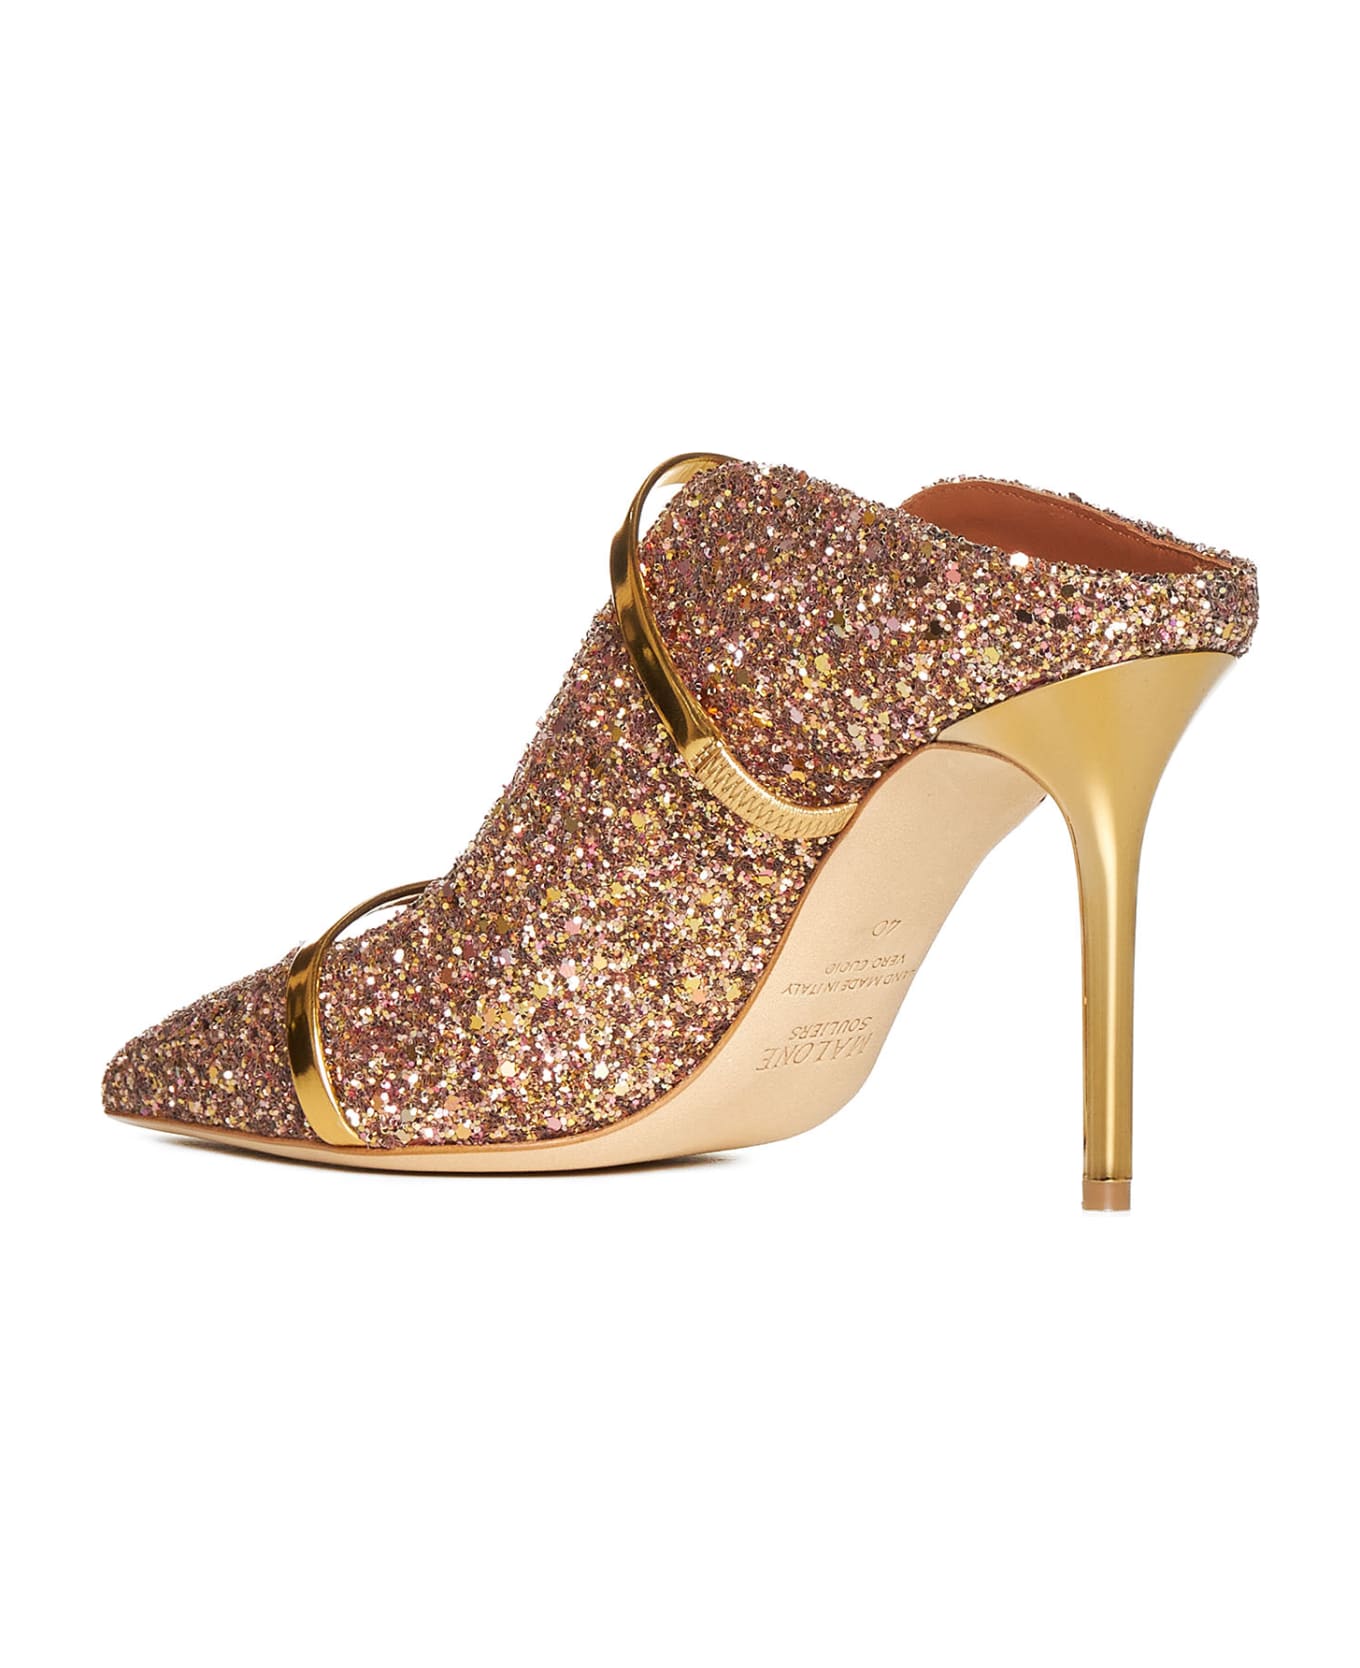 Malone Souliers Maureen Mules - Gold/Silver